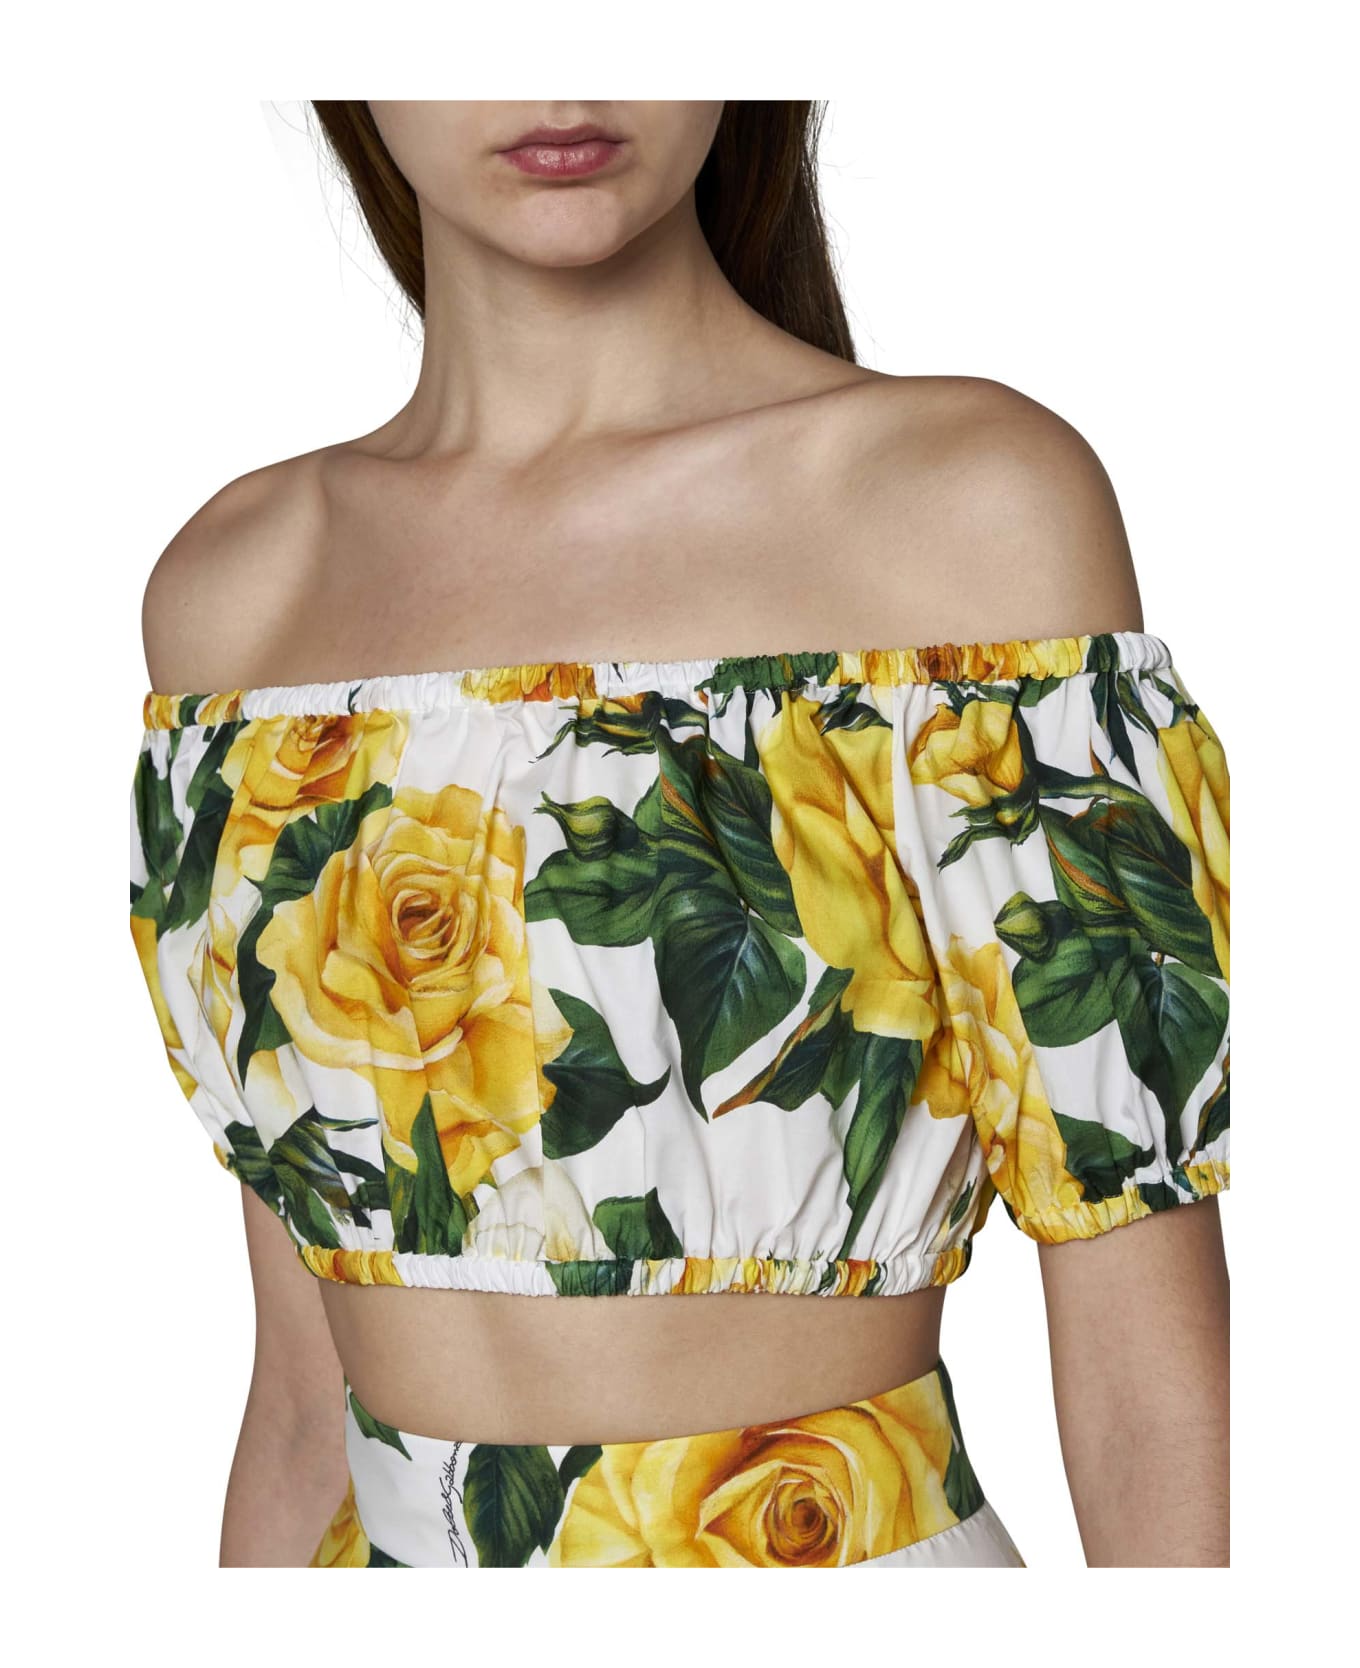 Dolce & Gabbana Crop Top With Floral Print - Rose gialle fdo bco